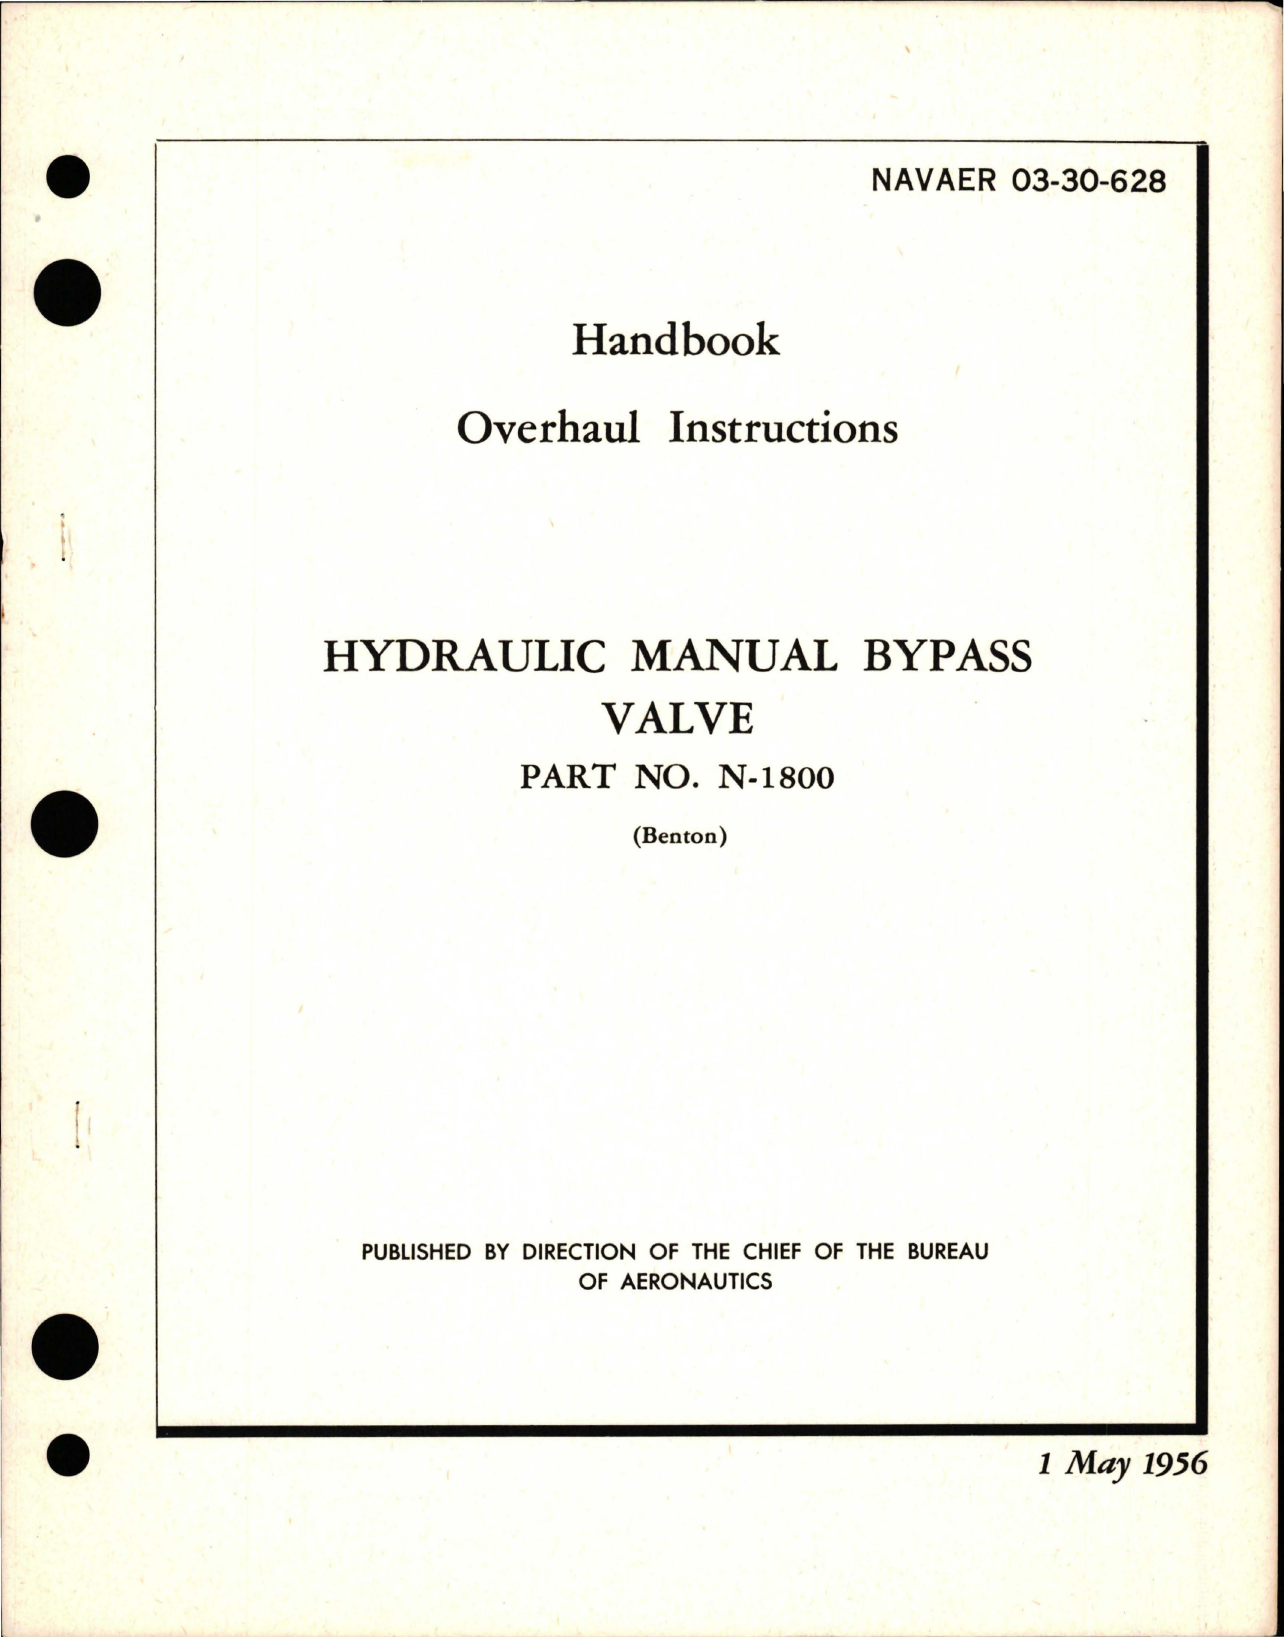 Sample page 1 from AirCorps Library document: Overhaul Instructions for Hydraulic Manual Bypass Valve - Part N-1800